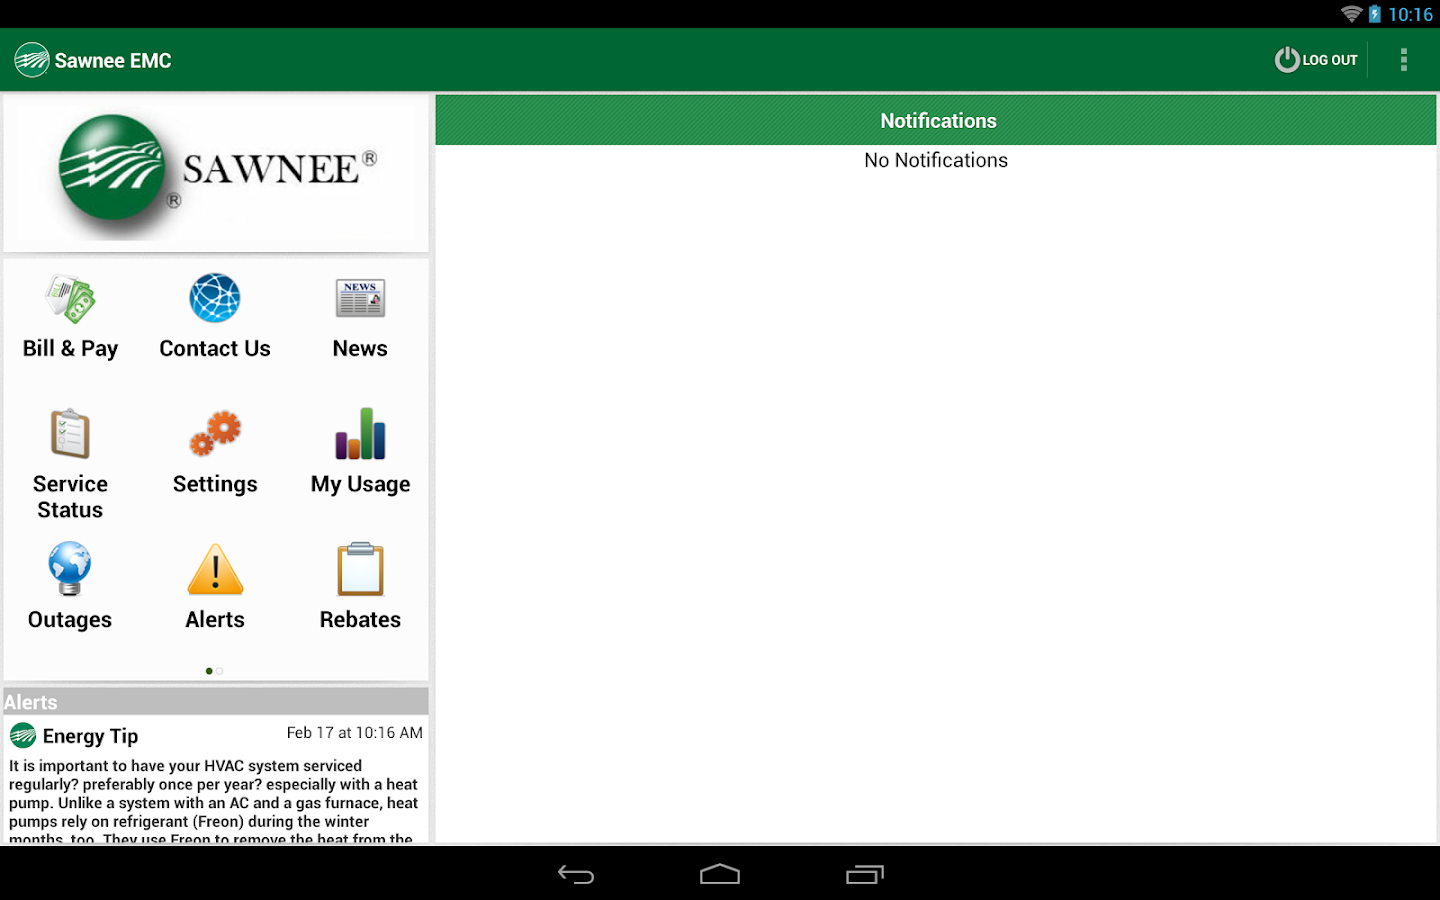 sawnee-emc-android-apps-on-google-play